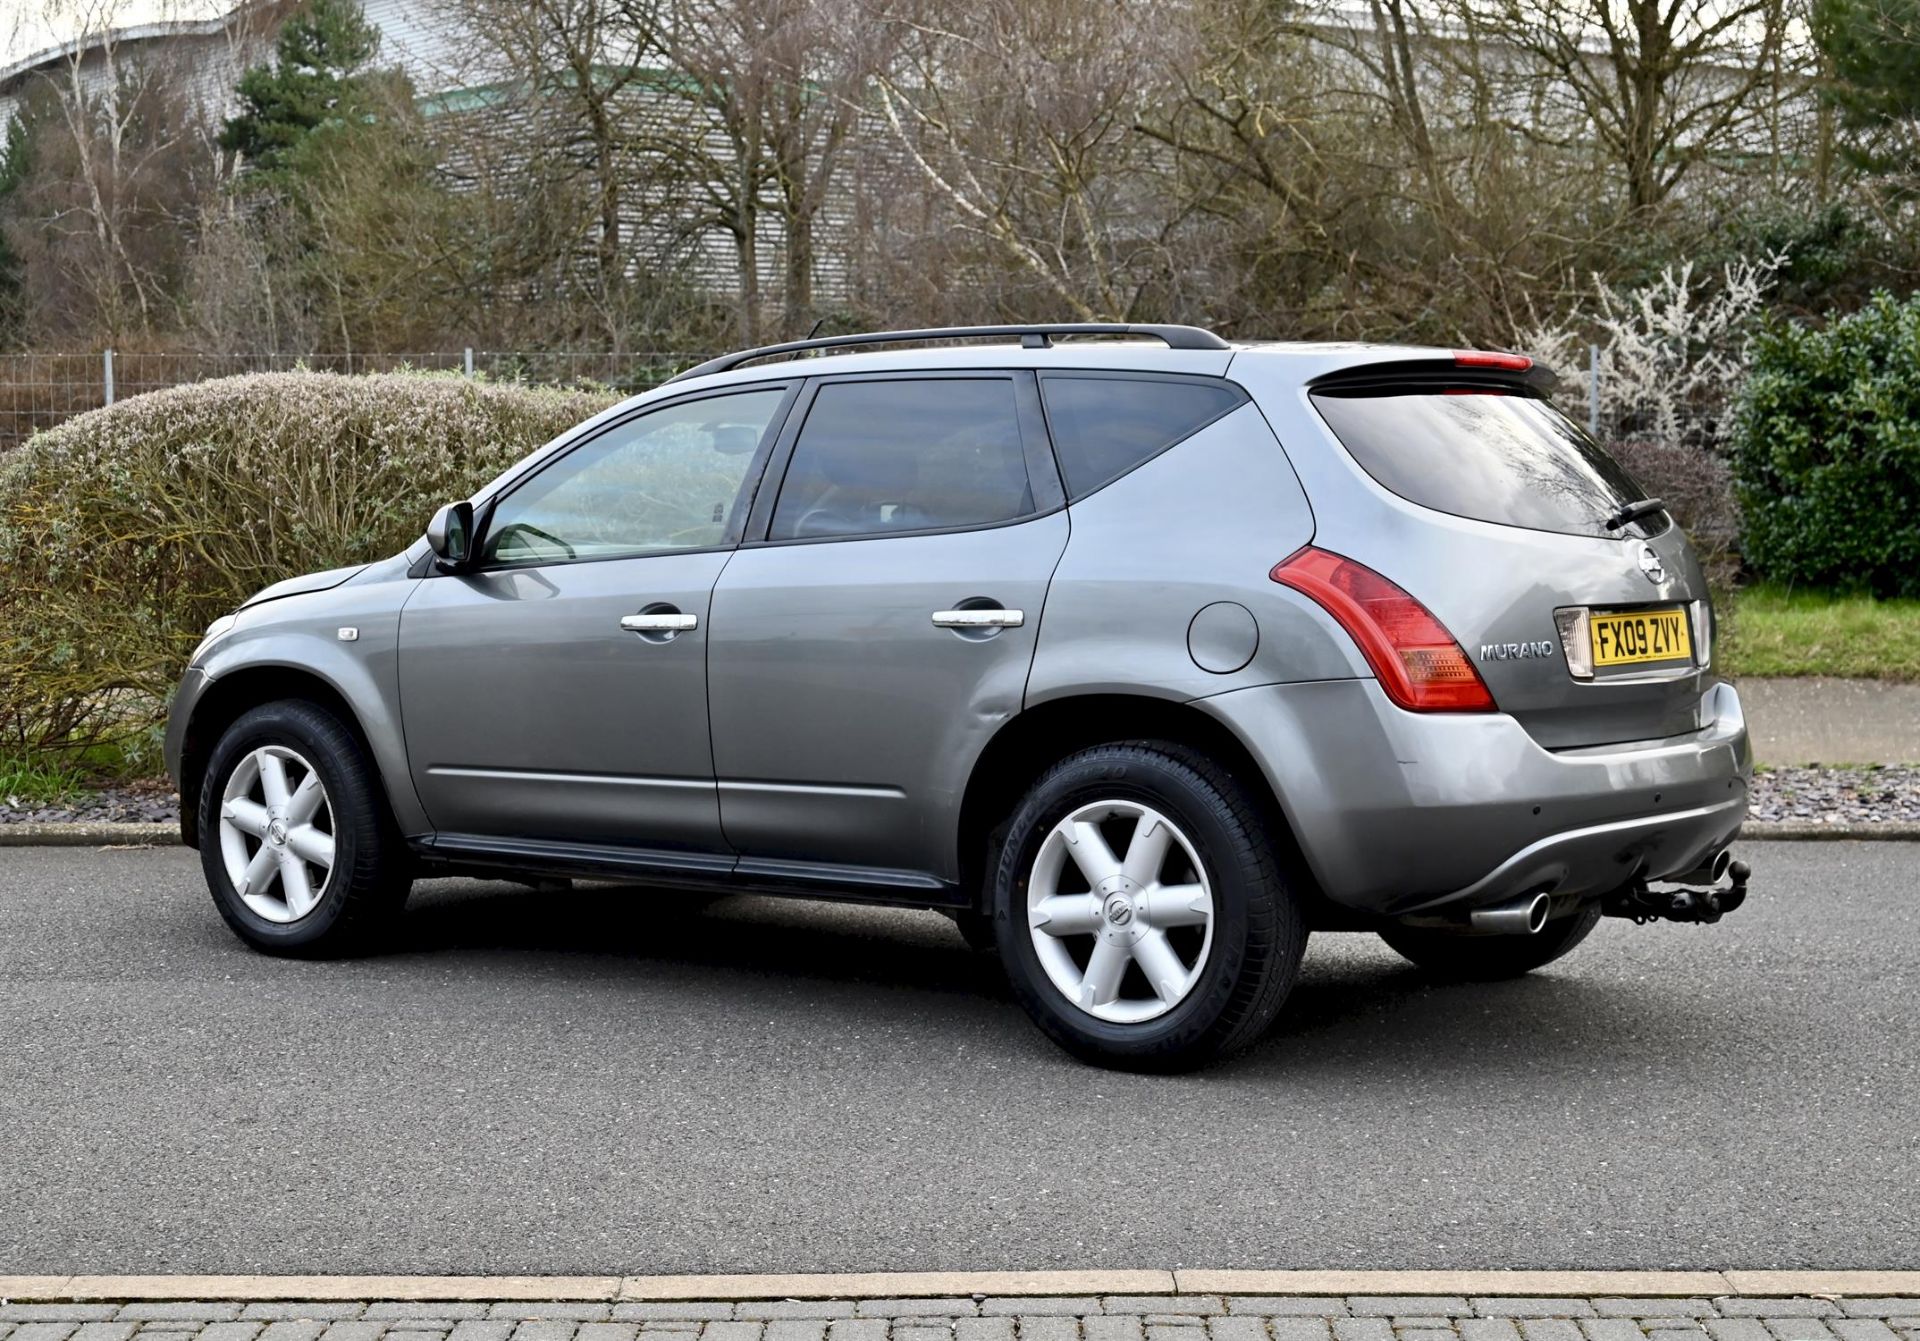 2009 Nissan Murano 3.5 Automatic. Registration number FX09 ZVY. 3,498cc petrol, auto 5-door MPV. - Image 3 of 9